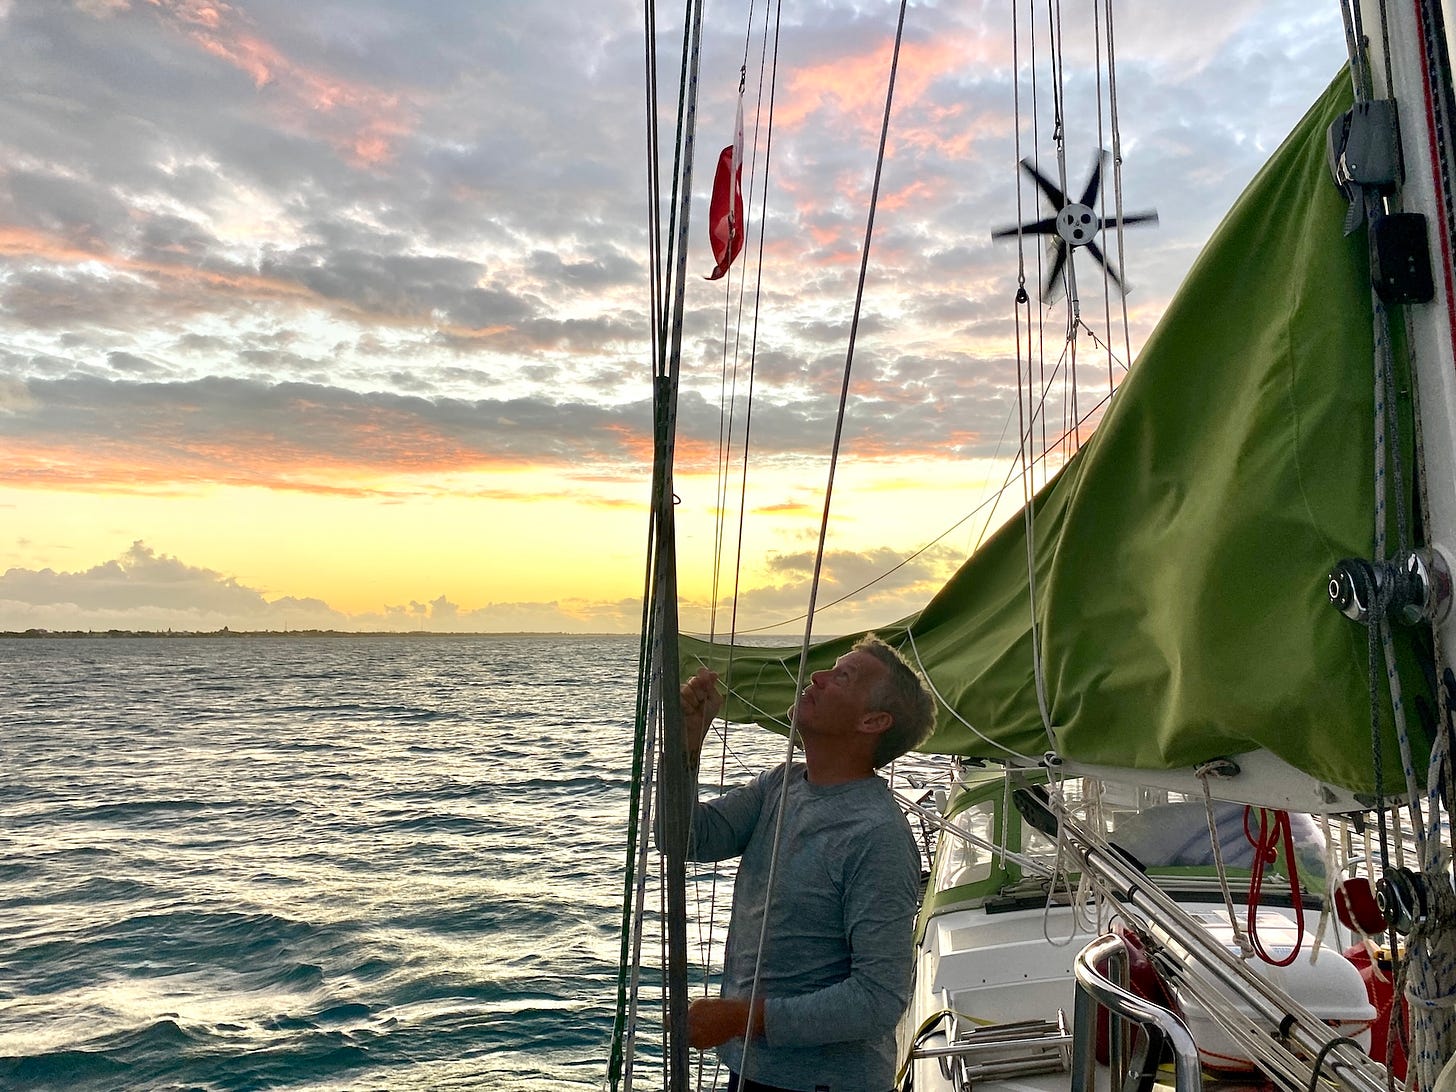 A beautiful sunset as seen from the deck of a sailboat as a man raises the Tongan flag